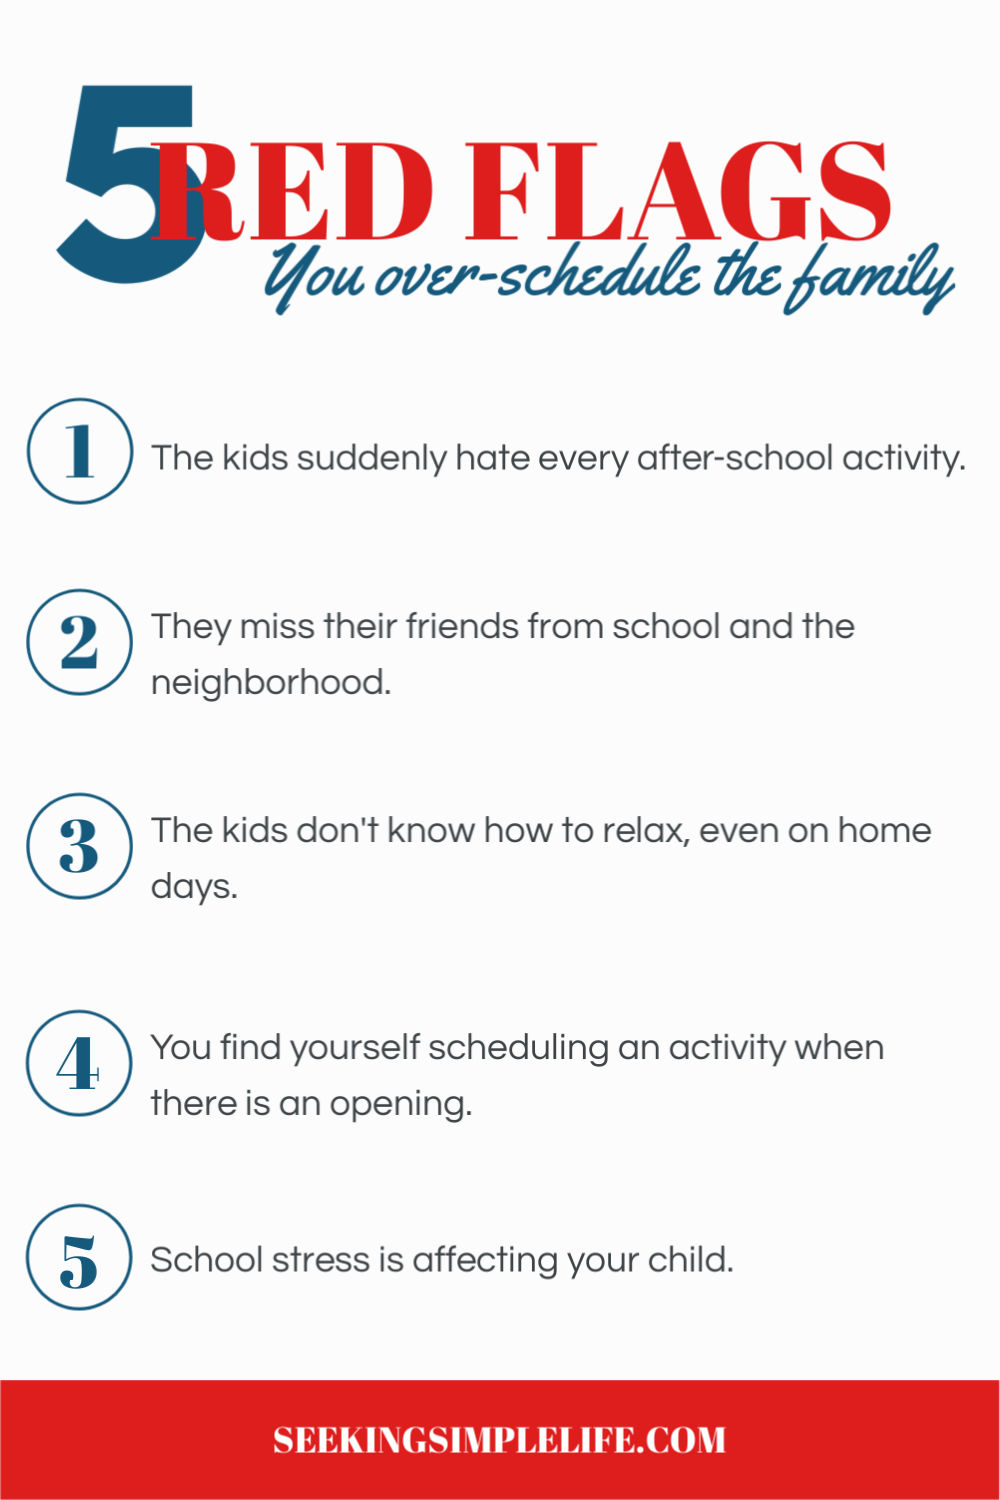 Is the family suffering from a busy schedule? Are you over-scheduling the family? Here are 5 signs you are over-scheduling the family. Click to find out 3 reasons to stop and 5 ways to stop over-scheduling the family. #lifelessons #parentinghacks #parentingadvice #workingmothers #busymoms #seekingsimplelife